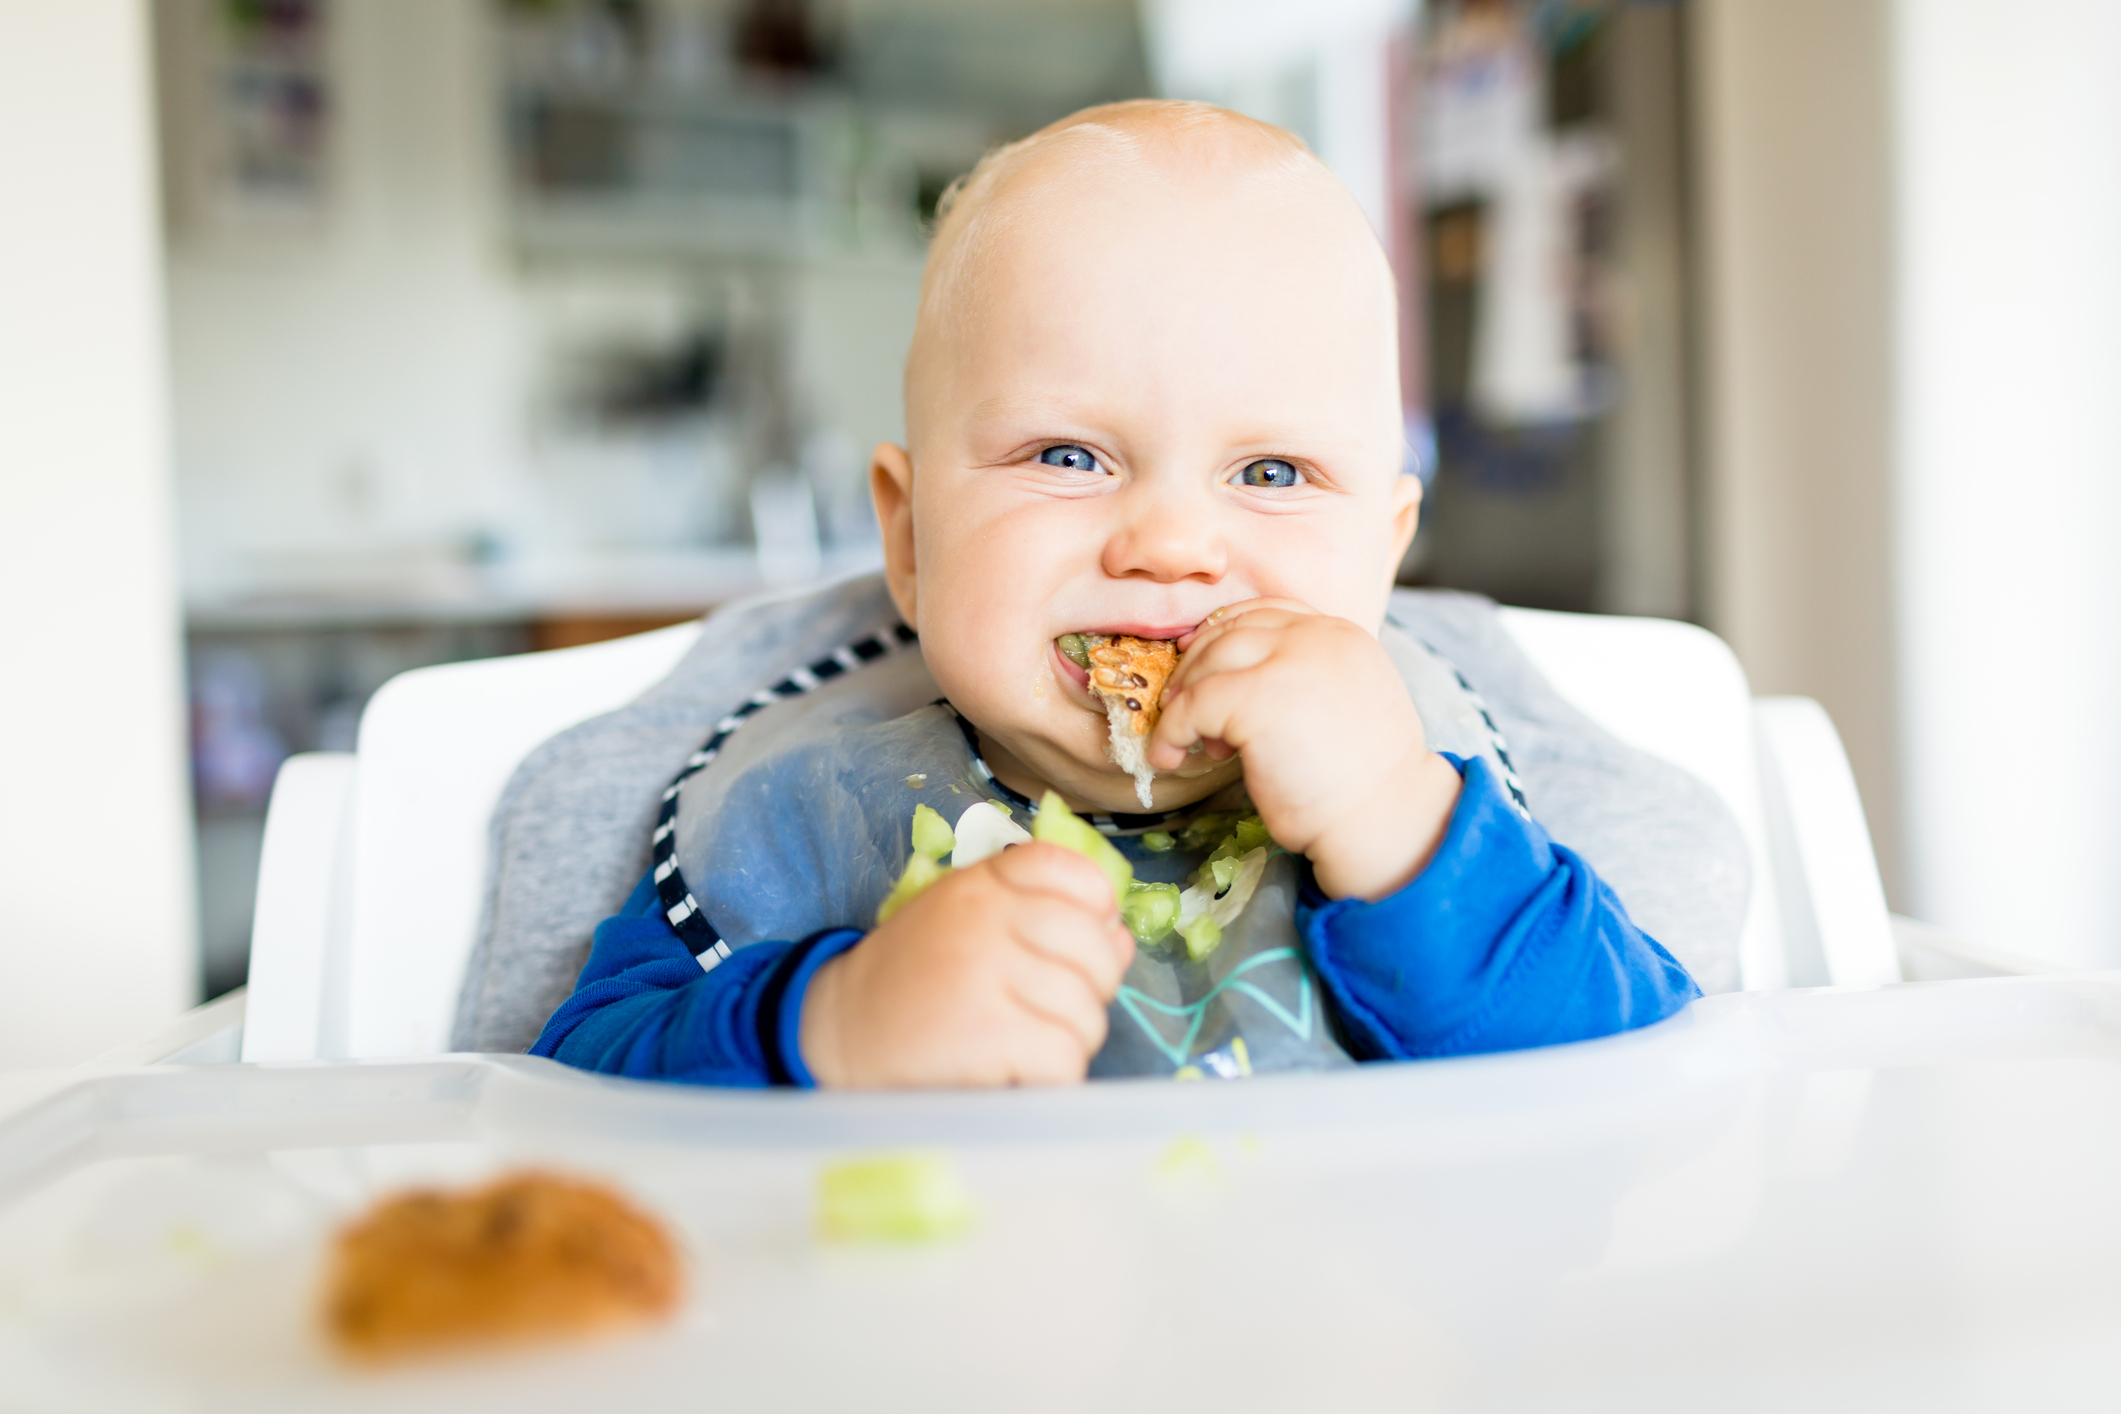 Getting Started on Solid Food: Baby Led Weaning & Spoon Feeding